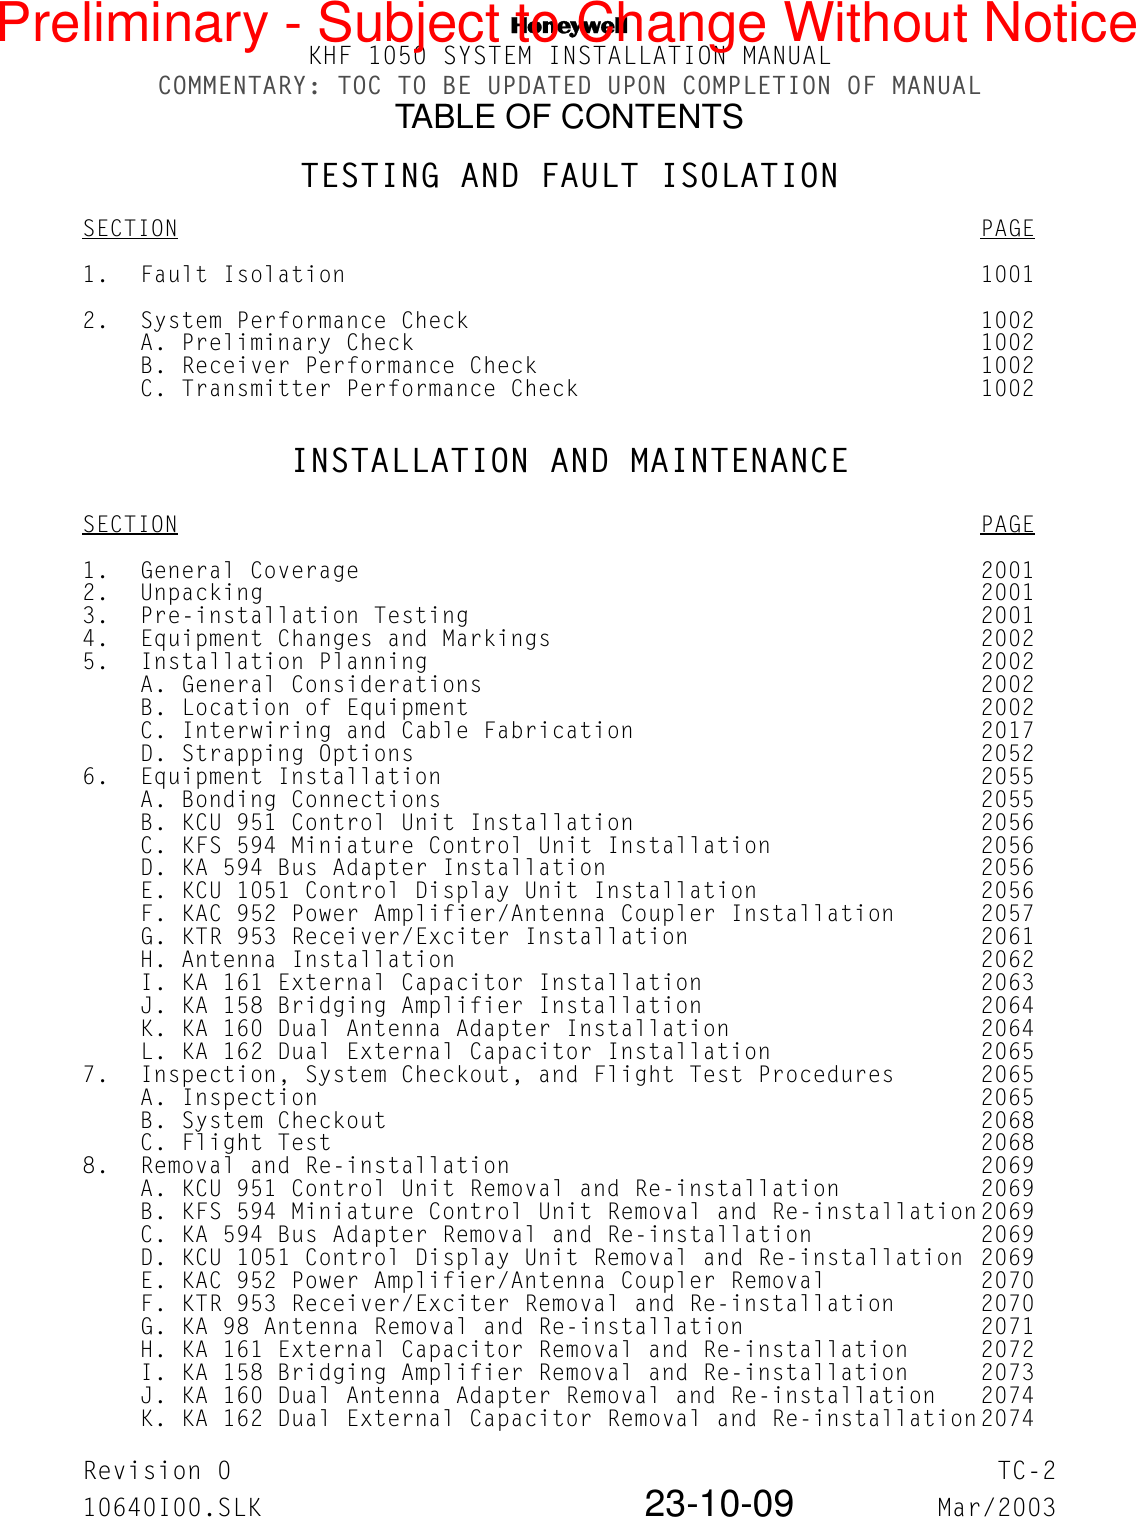 NKHF 1050 SYSTEM INSTALLATION MANUALCOMMENTARY: TOC TO BE UPDATED UPON COMPLETION OF MANUALTABLE OF CONTENTSRevision 0 TC-210640I00.SLK 23-10-09 Mar/2003TESTING AND FAULT ISOLATIONSECTION PAGE1. Fault Isolation 10012. System Performance Check 1002A. Preliminary Check 1002B. Receiver Performance Check 1002C. Transmitter Performance Check 1002INSTALLATION AND MAINTENANCESECTION PAGE1. General Coverage 20012. Unpacking 20013. Pre-installation Testing 20014. Equipment Changes and Markings 20025. Installation Planning 2002A. General Considerations 2002B. Location of Equipment 2002C. Interwiring and Cable Fabrication 2017D. Strapping Options 20526. Equipment Installation 2055A. Bonding Connections 2055B. KCU 951 Control Unit Installation 2056C. KFS 594 Miniature Control Unit Installation 2056D. KA 594 Bus Adapter Installation 2056E. KCU 1051 Control Display Unit Installation 2056F. KAC 952 Power Amplifier/Antenna Coupler Installation 2057G. KTR 953 Receiver/Exciter Installation 2061H. Antenna Installation 2062I. KA 161 External Capacitor Installation 2063J. KA 158 Bridging Amplifier Installation 2064K. KA 160 Dual Antenna Adapter Installation 2064L. KA 162 Dual External Capacitor Installation 20657. Inspection, System Checkout, and Flight Test Procedures 2065A. Inspection 2065B. System Checkout 2068C. Flight Test 20688. Removal and Re-installation 2069A. KCU 951 Control Unit Removal and Re-installation 2069B. KFS 594 Miniature Control Unit Removal and Re-installation2069C. KA 594 Bus Adapter Removal and Re-installation 2069D. KCU 1051 Control Display Unit Removal and Re-installation 2069E. KAC 952 Power Amplifier/Antenna Coupler Removal 2070F. KTR 953 Receiver/Exciter Removal and Re-installation 2070G. KA 98 Antenna Removal and Re-installation 2071H. KA 161 External Capacitor Removal and Re-installation 2072I. KA 158 Bridging Amplifier Removal and Re-installation 2073J. KA 160 Dual Antenna Adapter Removal and Re-installation 2074K. KA 162 Dual External Capacitor Removal and Re-installation2074Preliminary - Subject to Change Without Notice